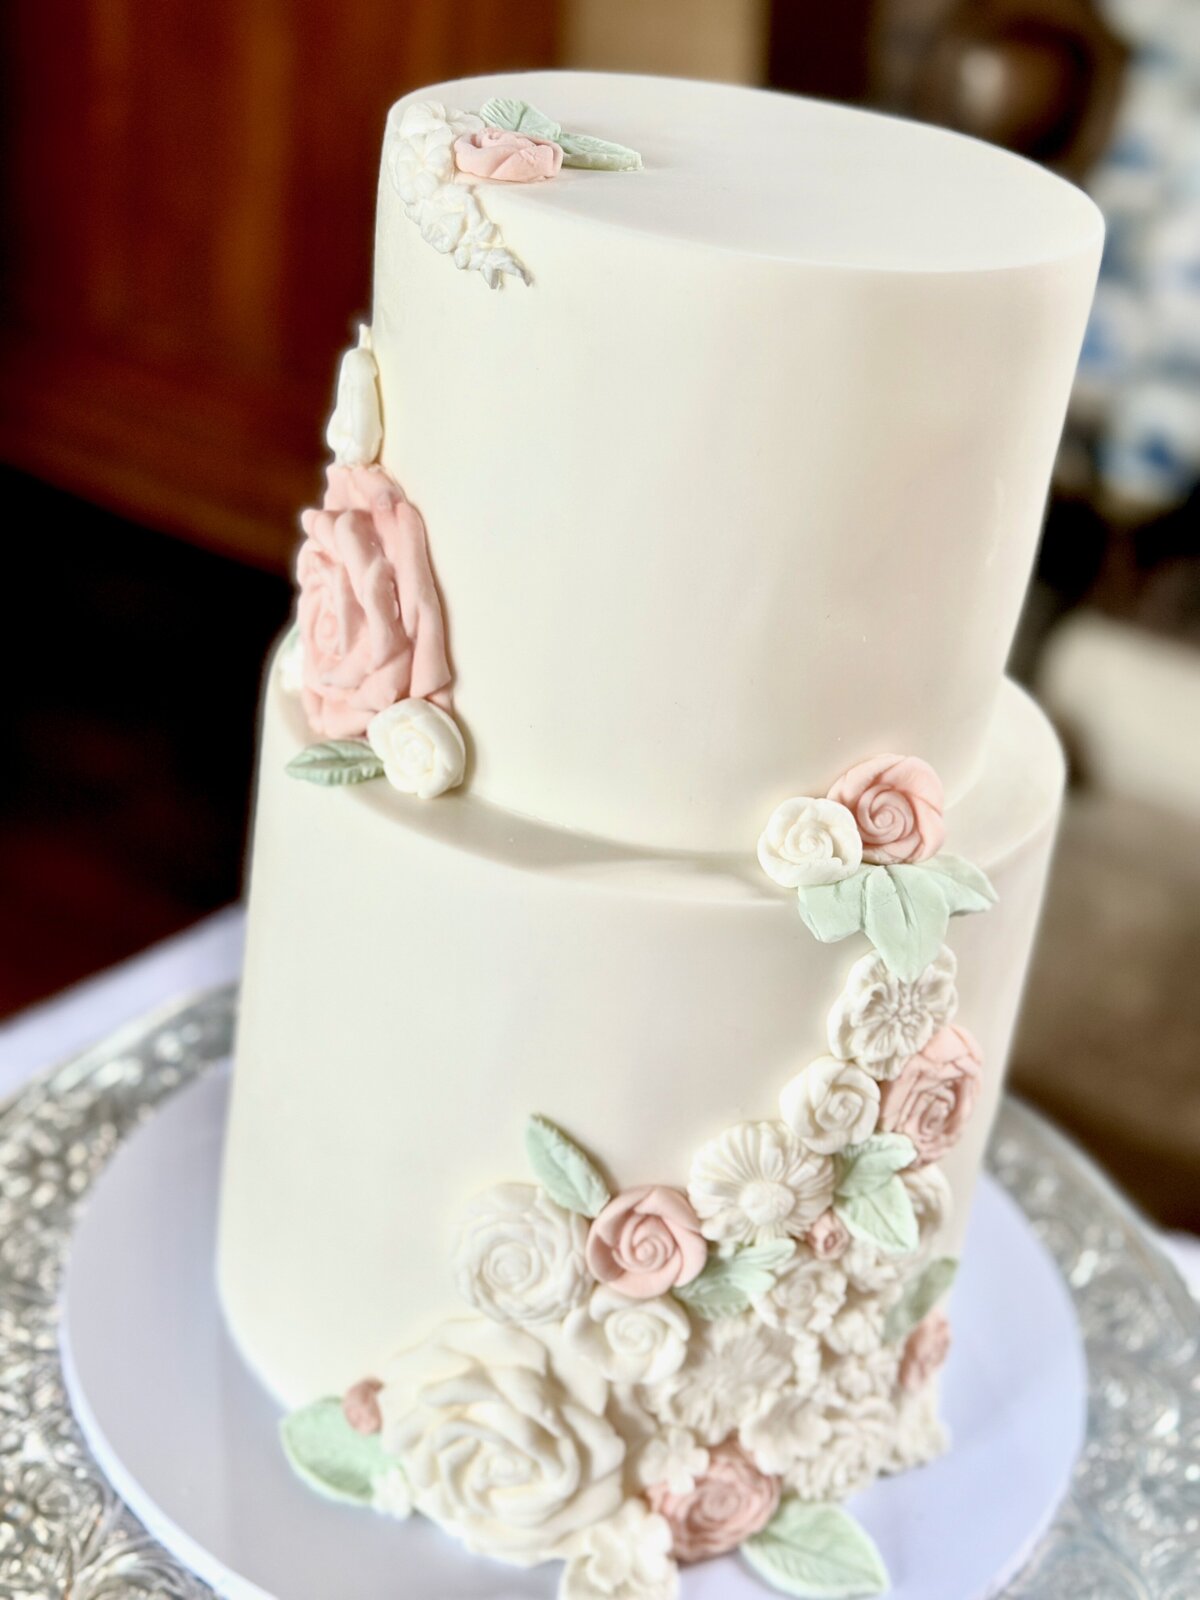 layers-graces-iced-wedding-cake-iced-floral-straight-edge